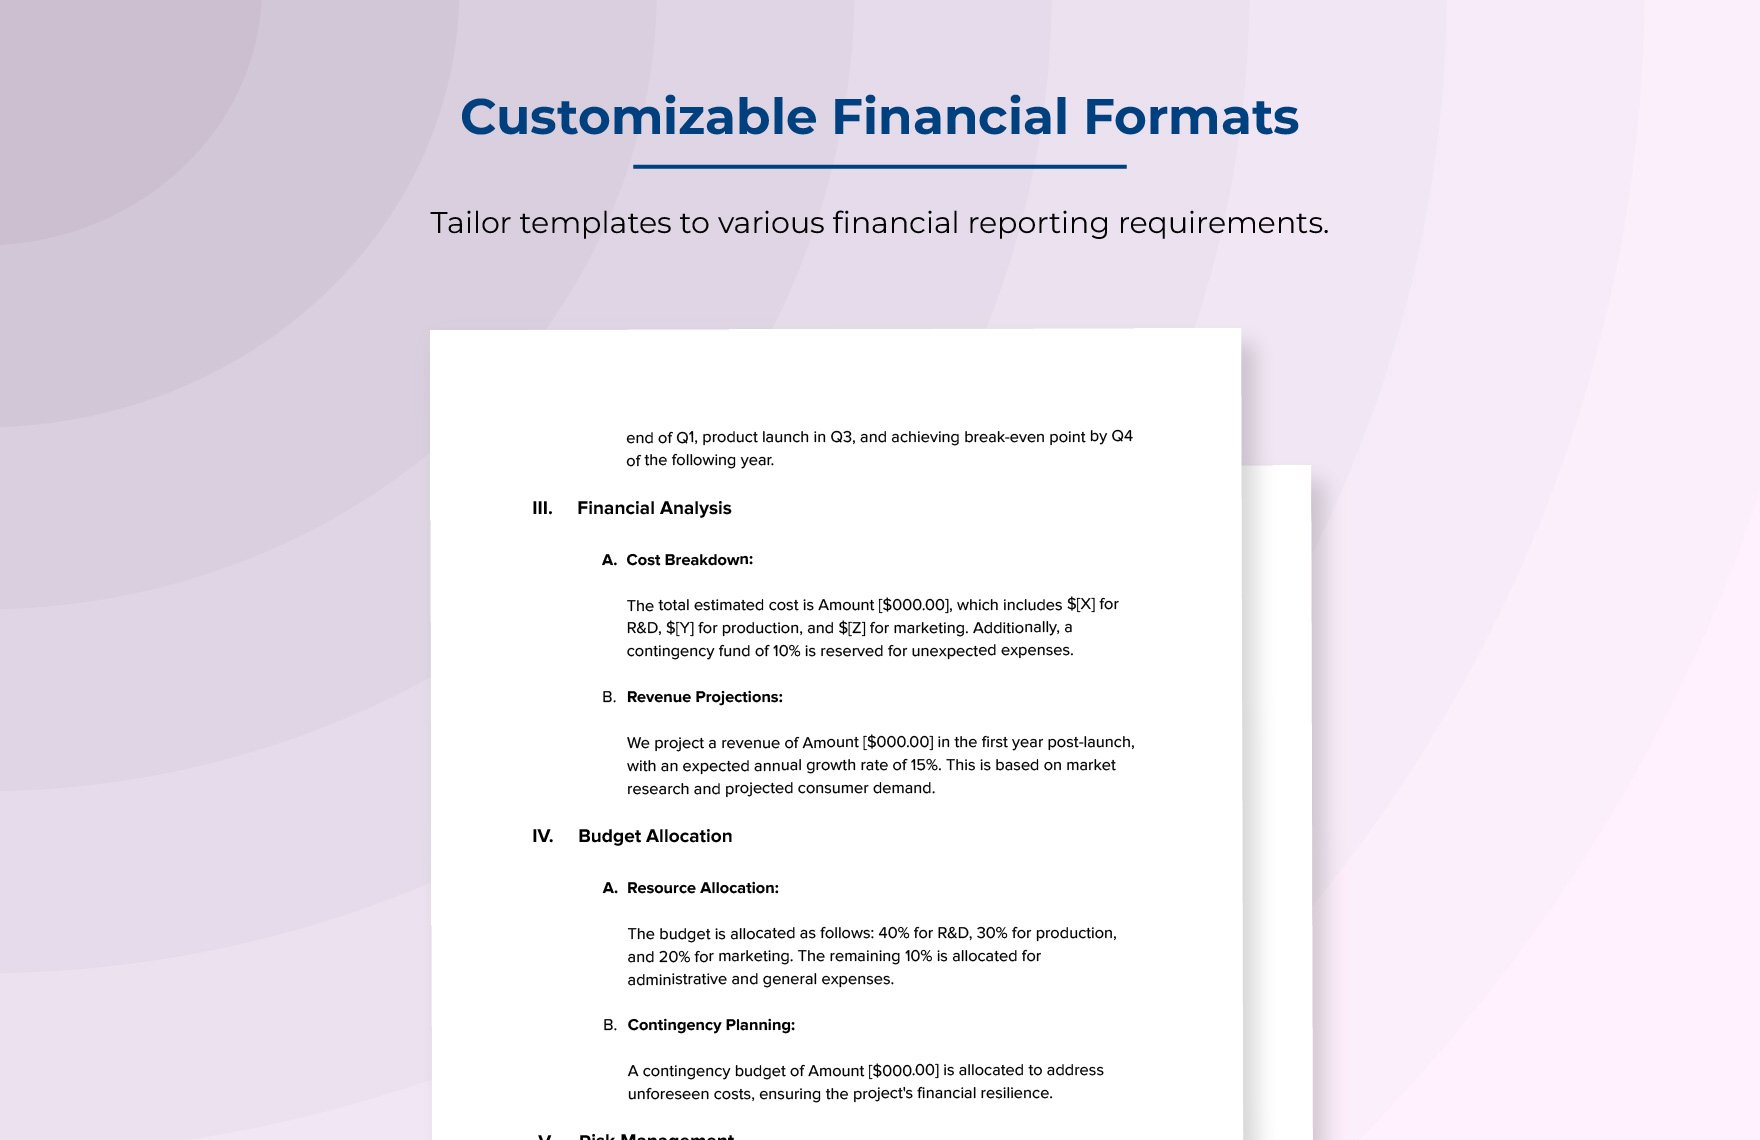 Financial Project Plan Template